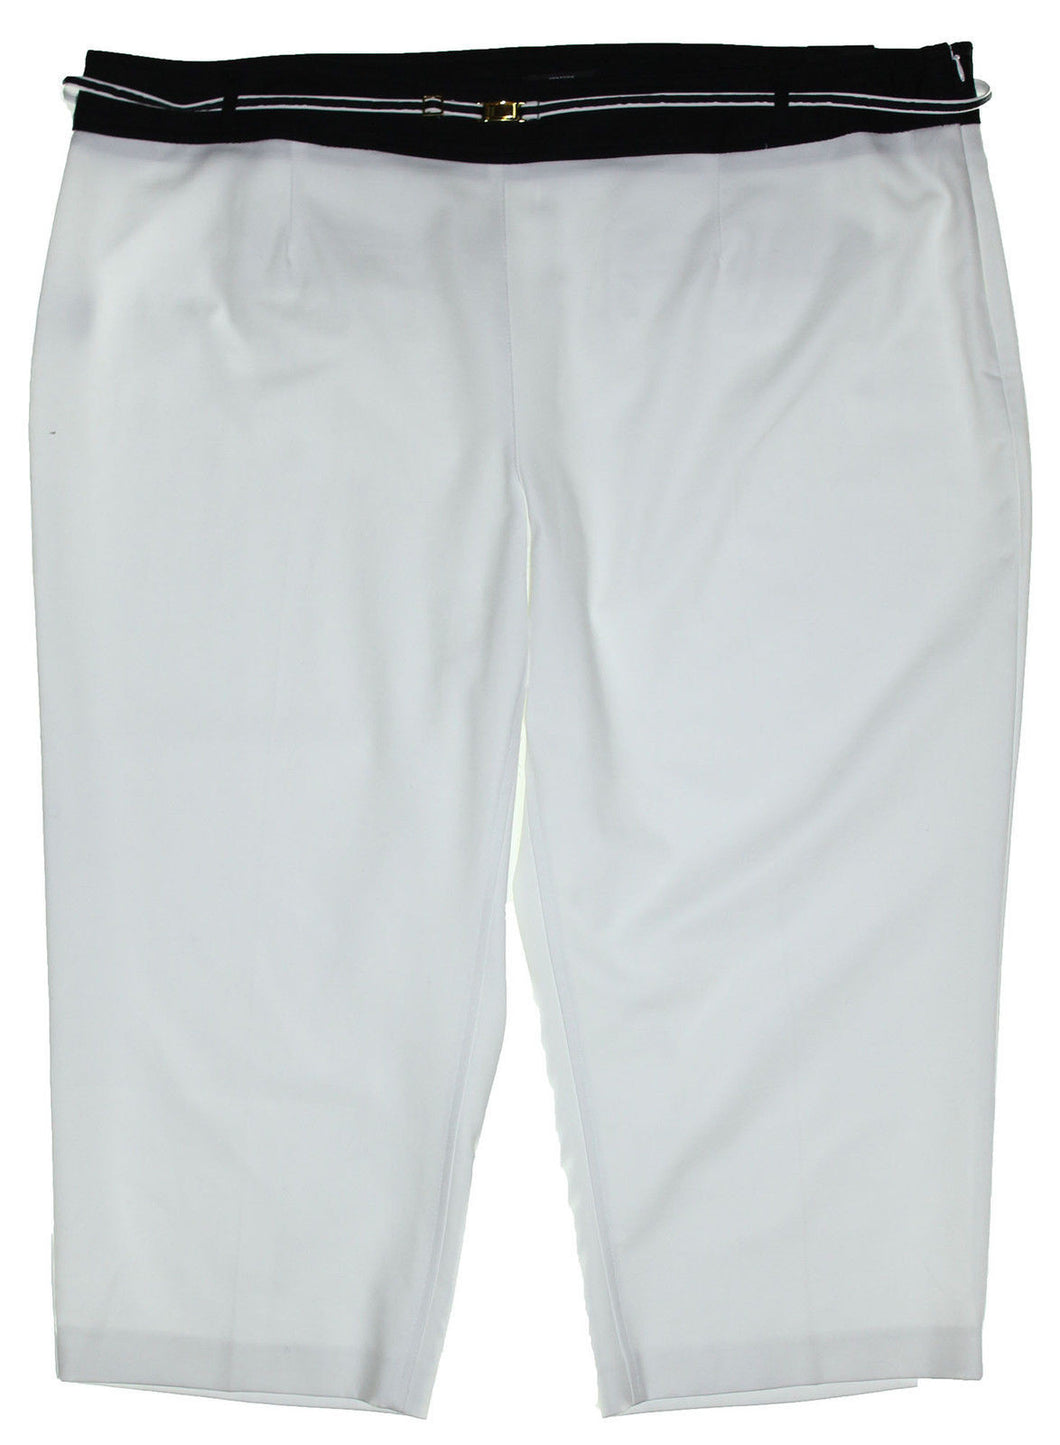 Style & Co White Contrast Waist Belted Side Zip Capri Pants